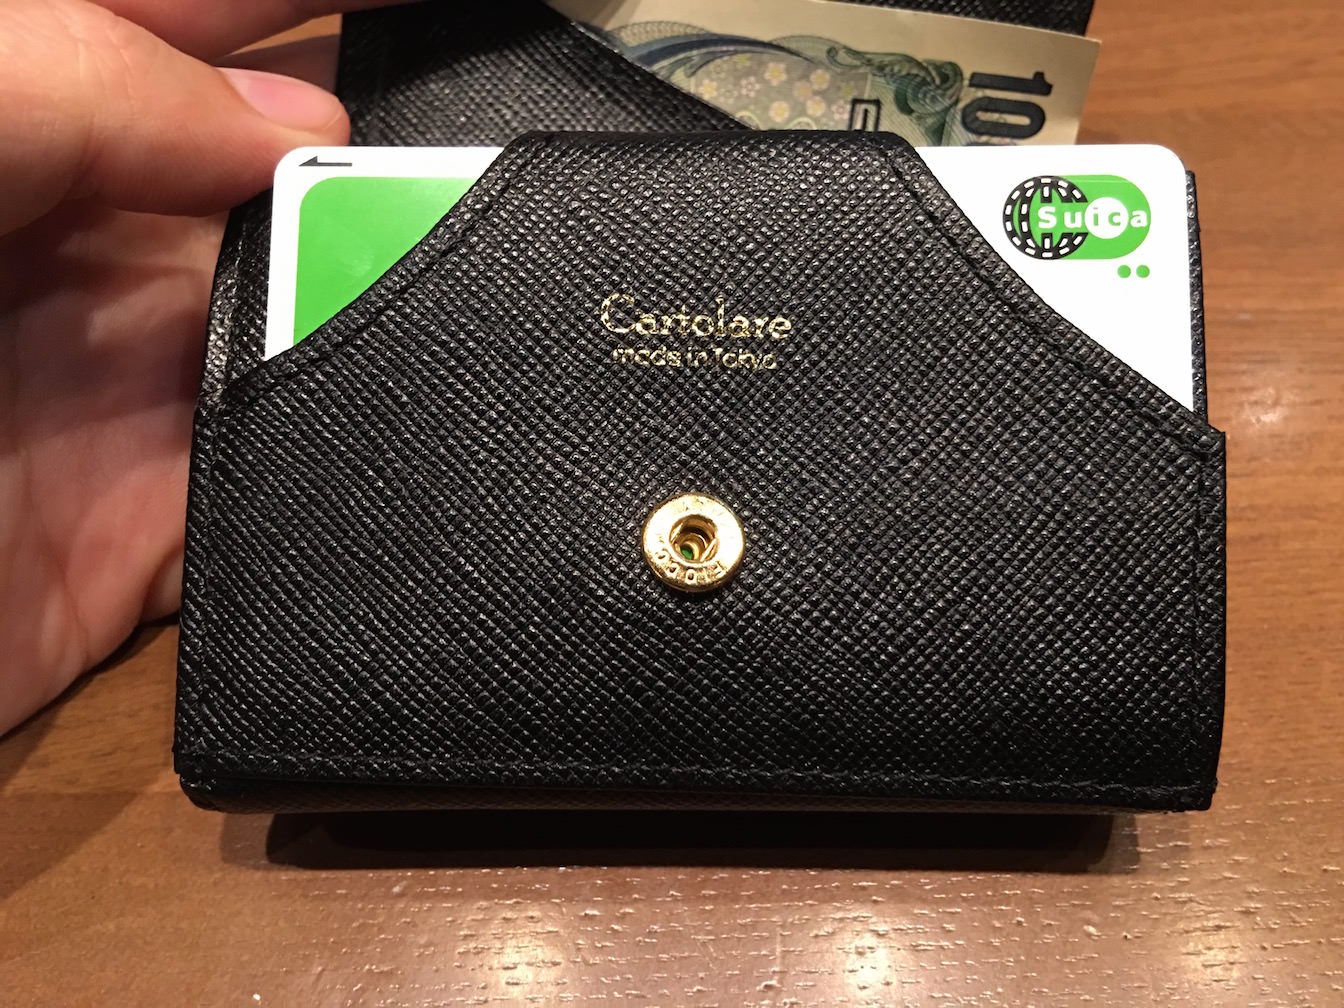 Review of hammock wallet compact 4